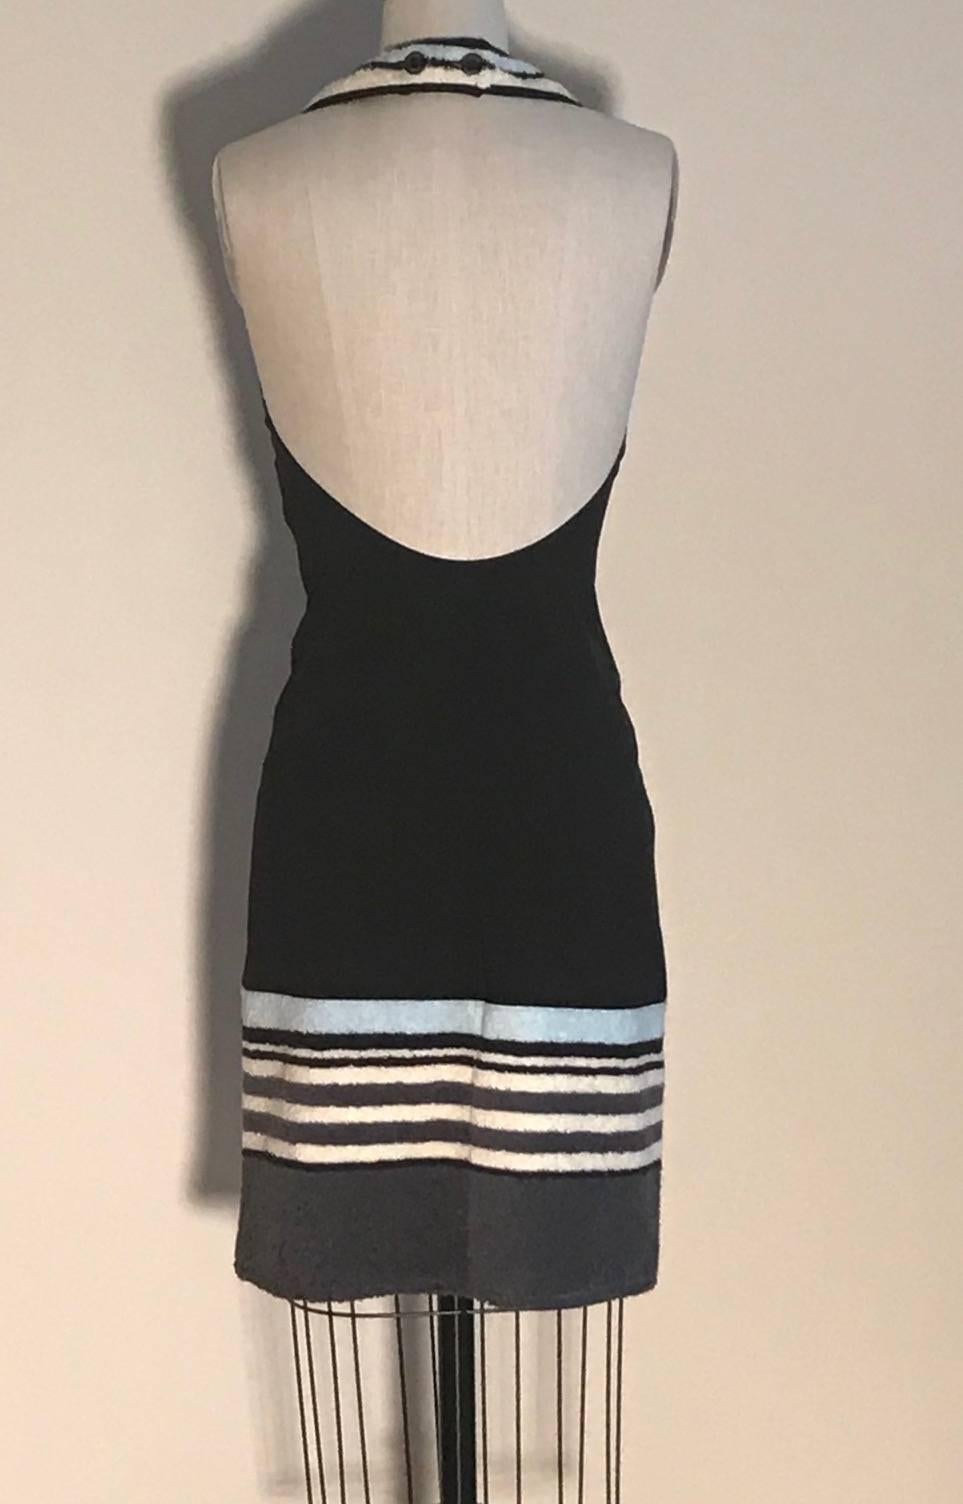 Chanel black halter neck dress with baby blue, cream and grey terry cloth stripe trim at neck and hem from the 2000 Chanel Identification line. Low back. Two buttons at back neck strap read 'Chanel, Paris.' Perfect cover up for the beach or pool